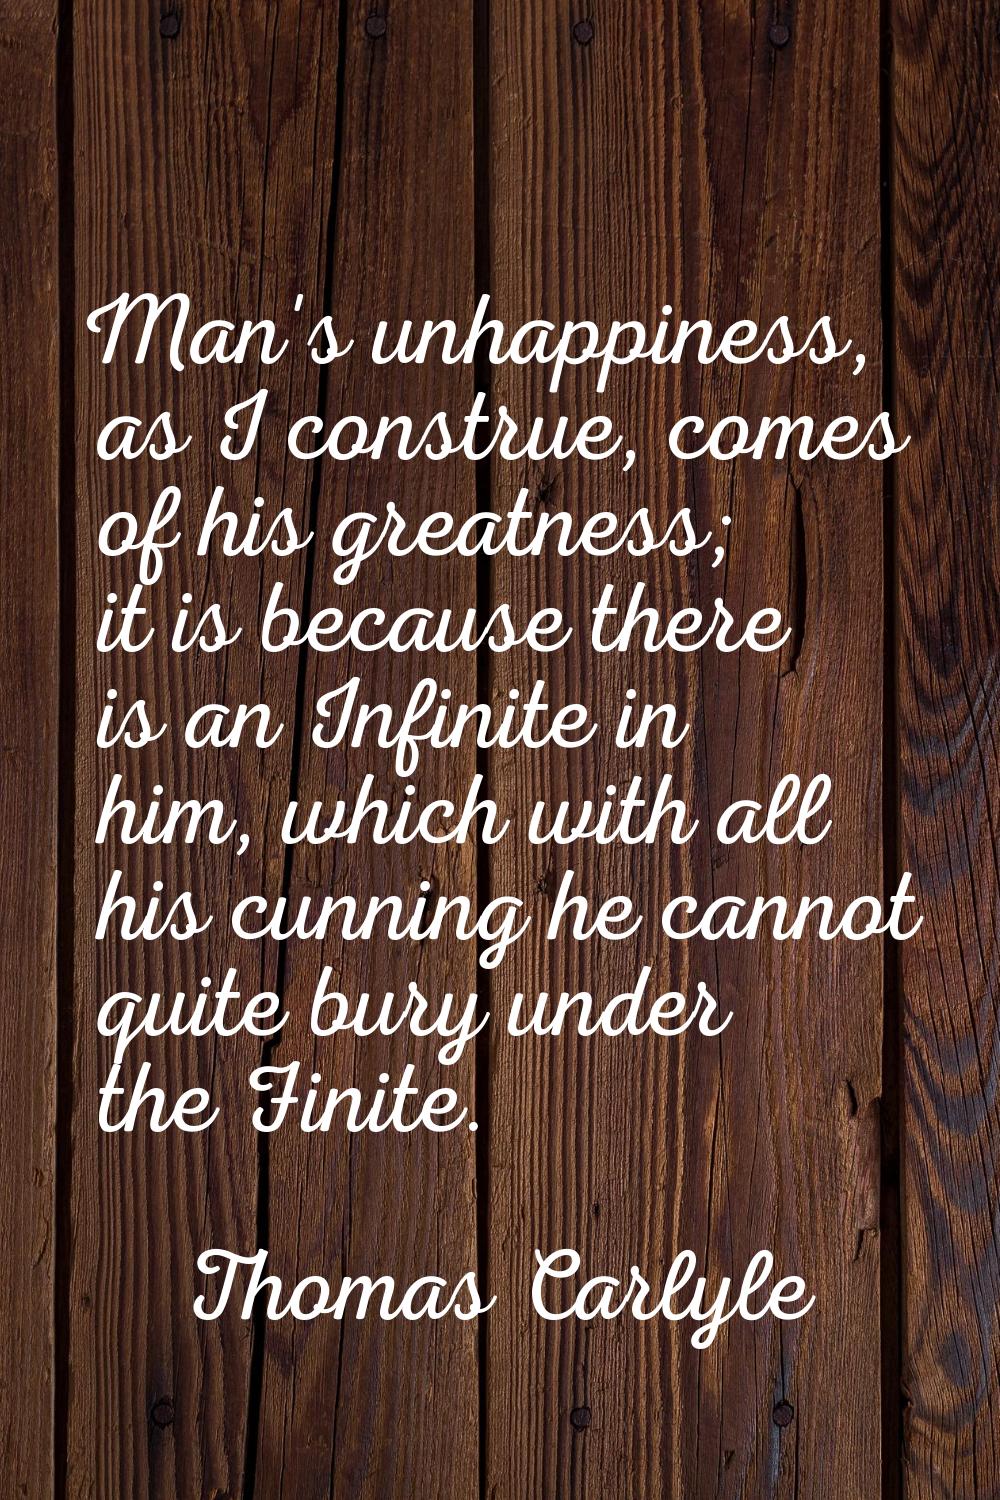 Man's unhappiness, as I construe, comes of his greatness; it is because there is an Infinite in him